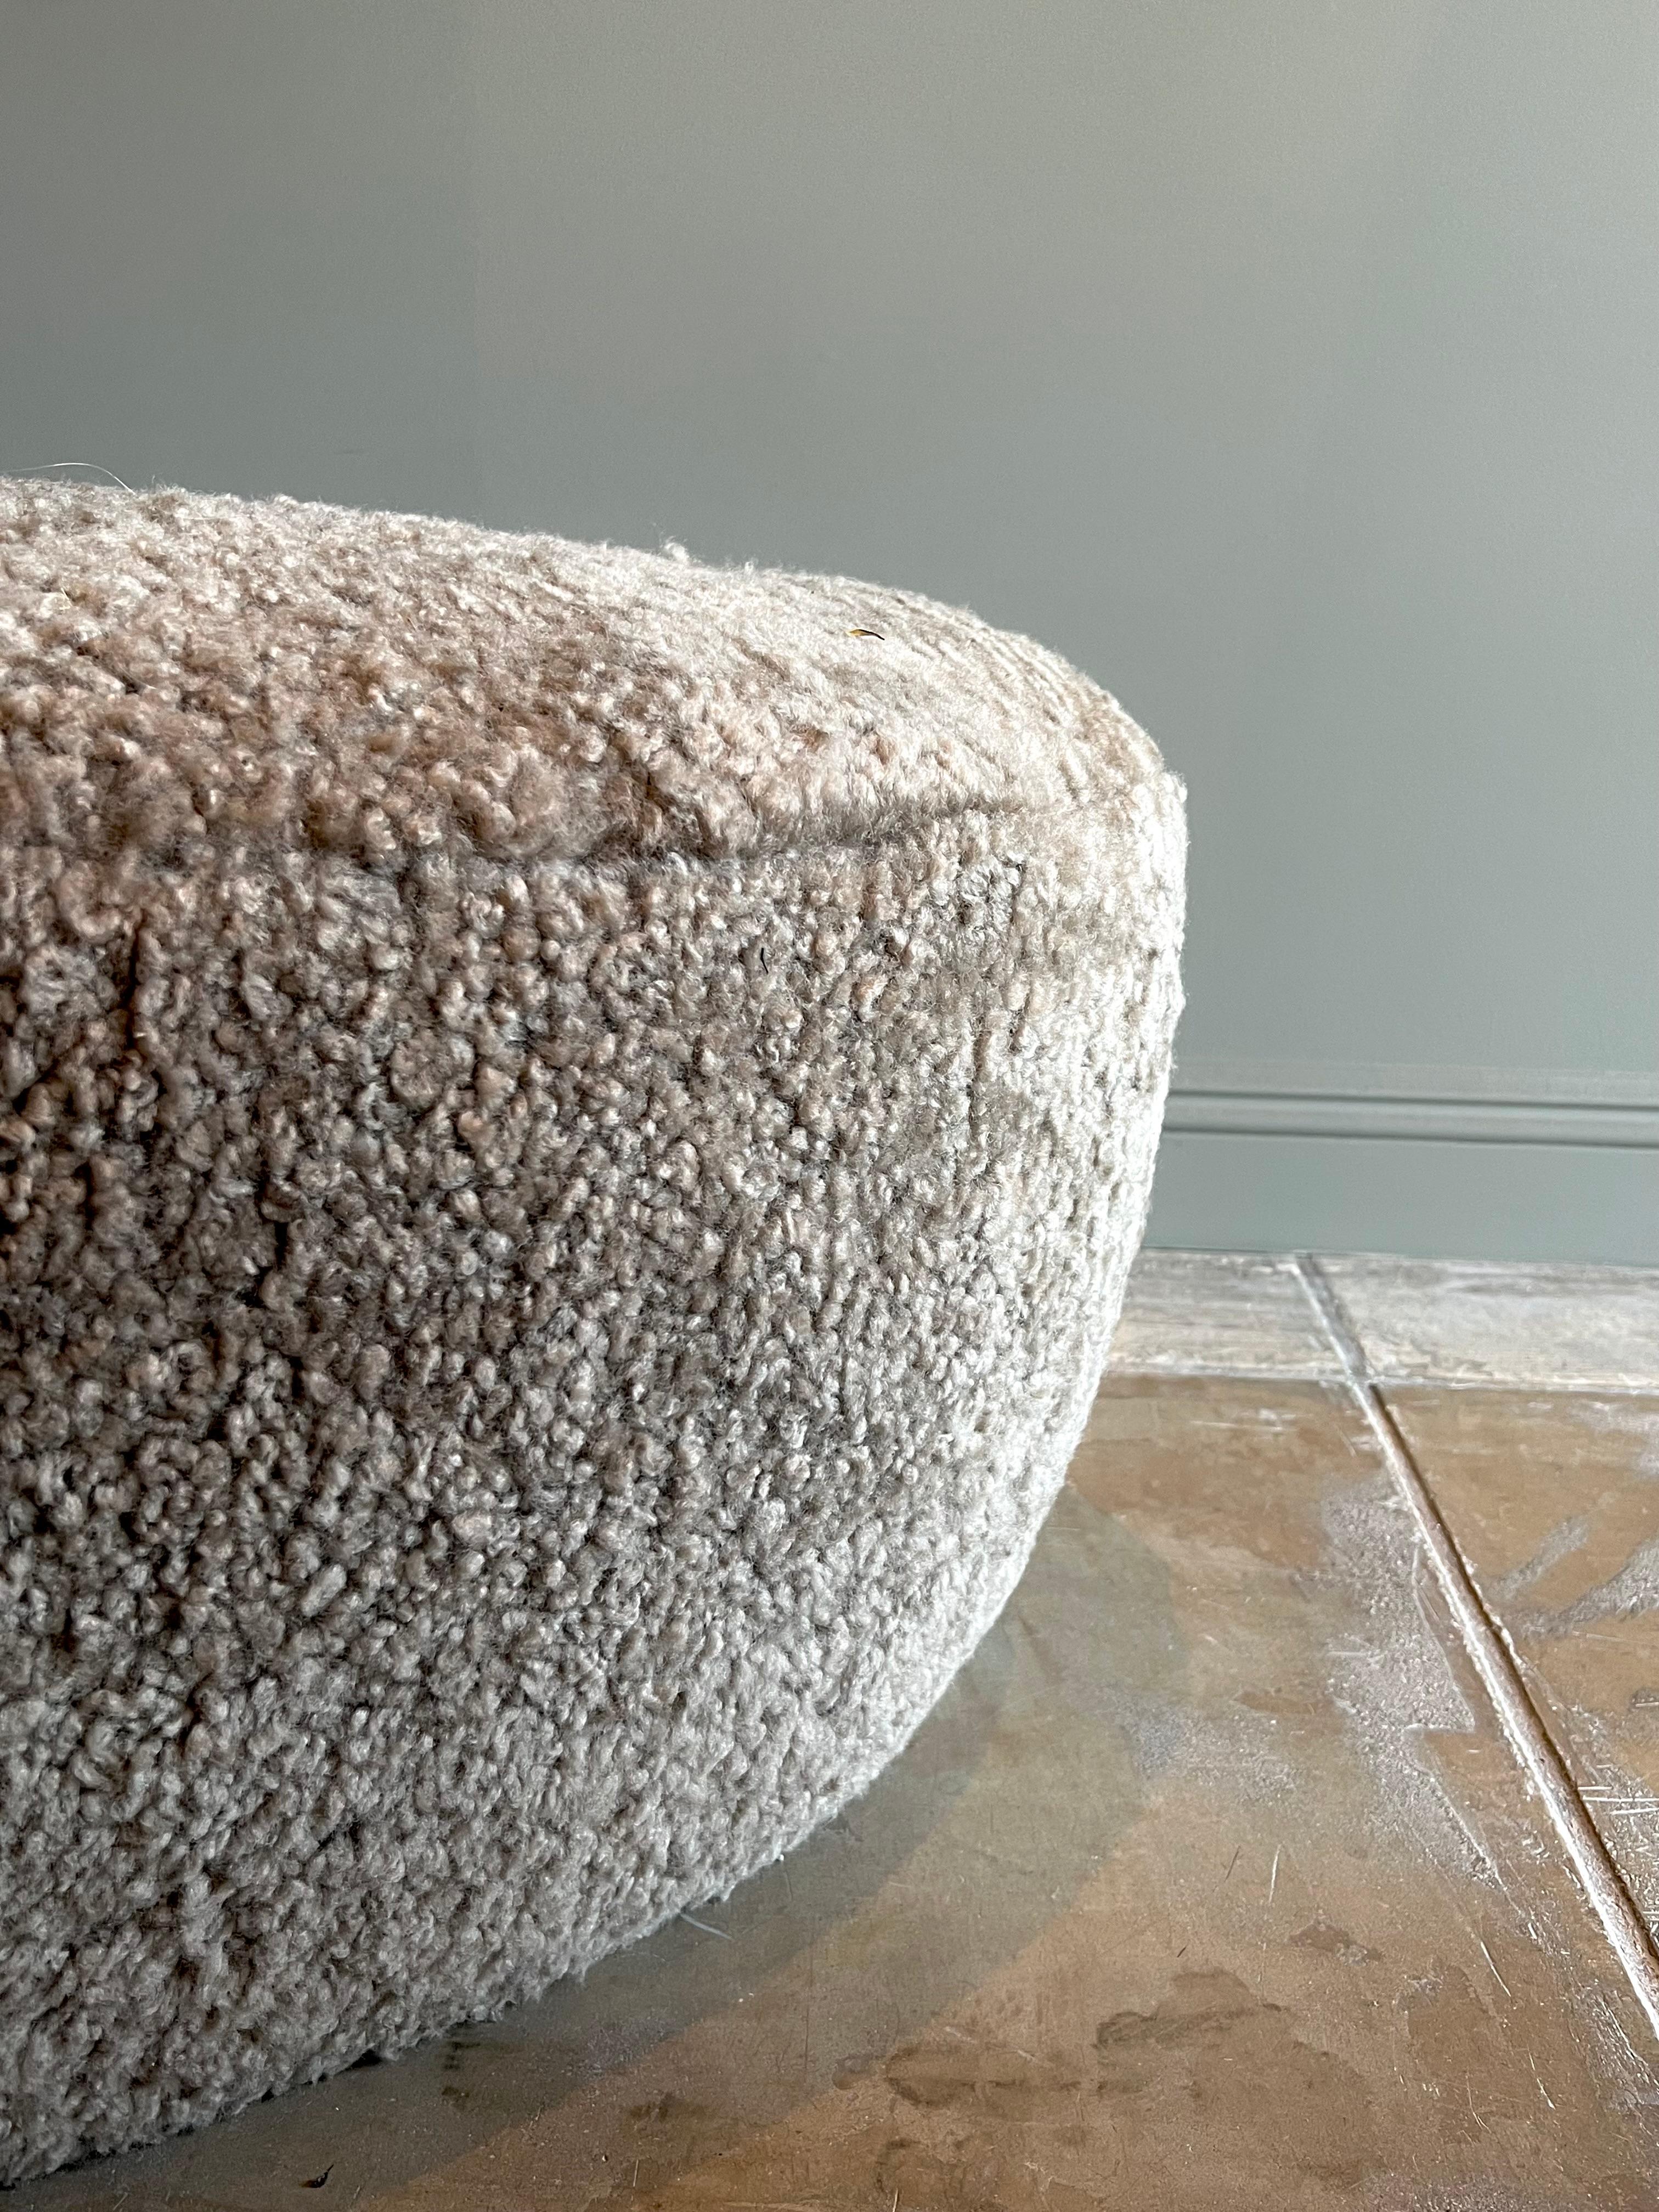 Studio OSKLO custom pouf in Mushroom-hued shearling as well as other fabric options and dimensions.